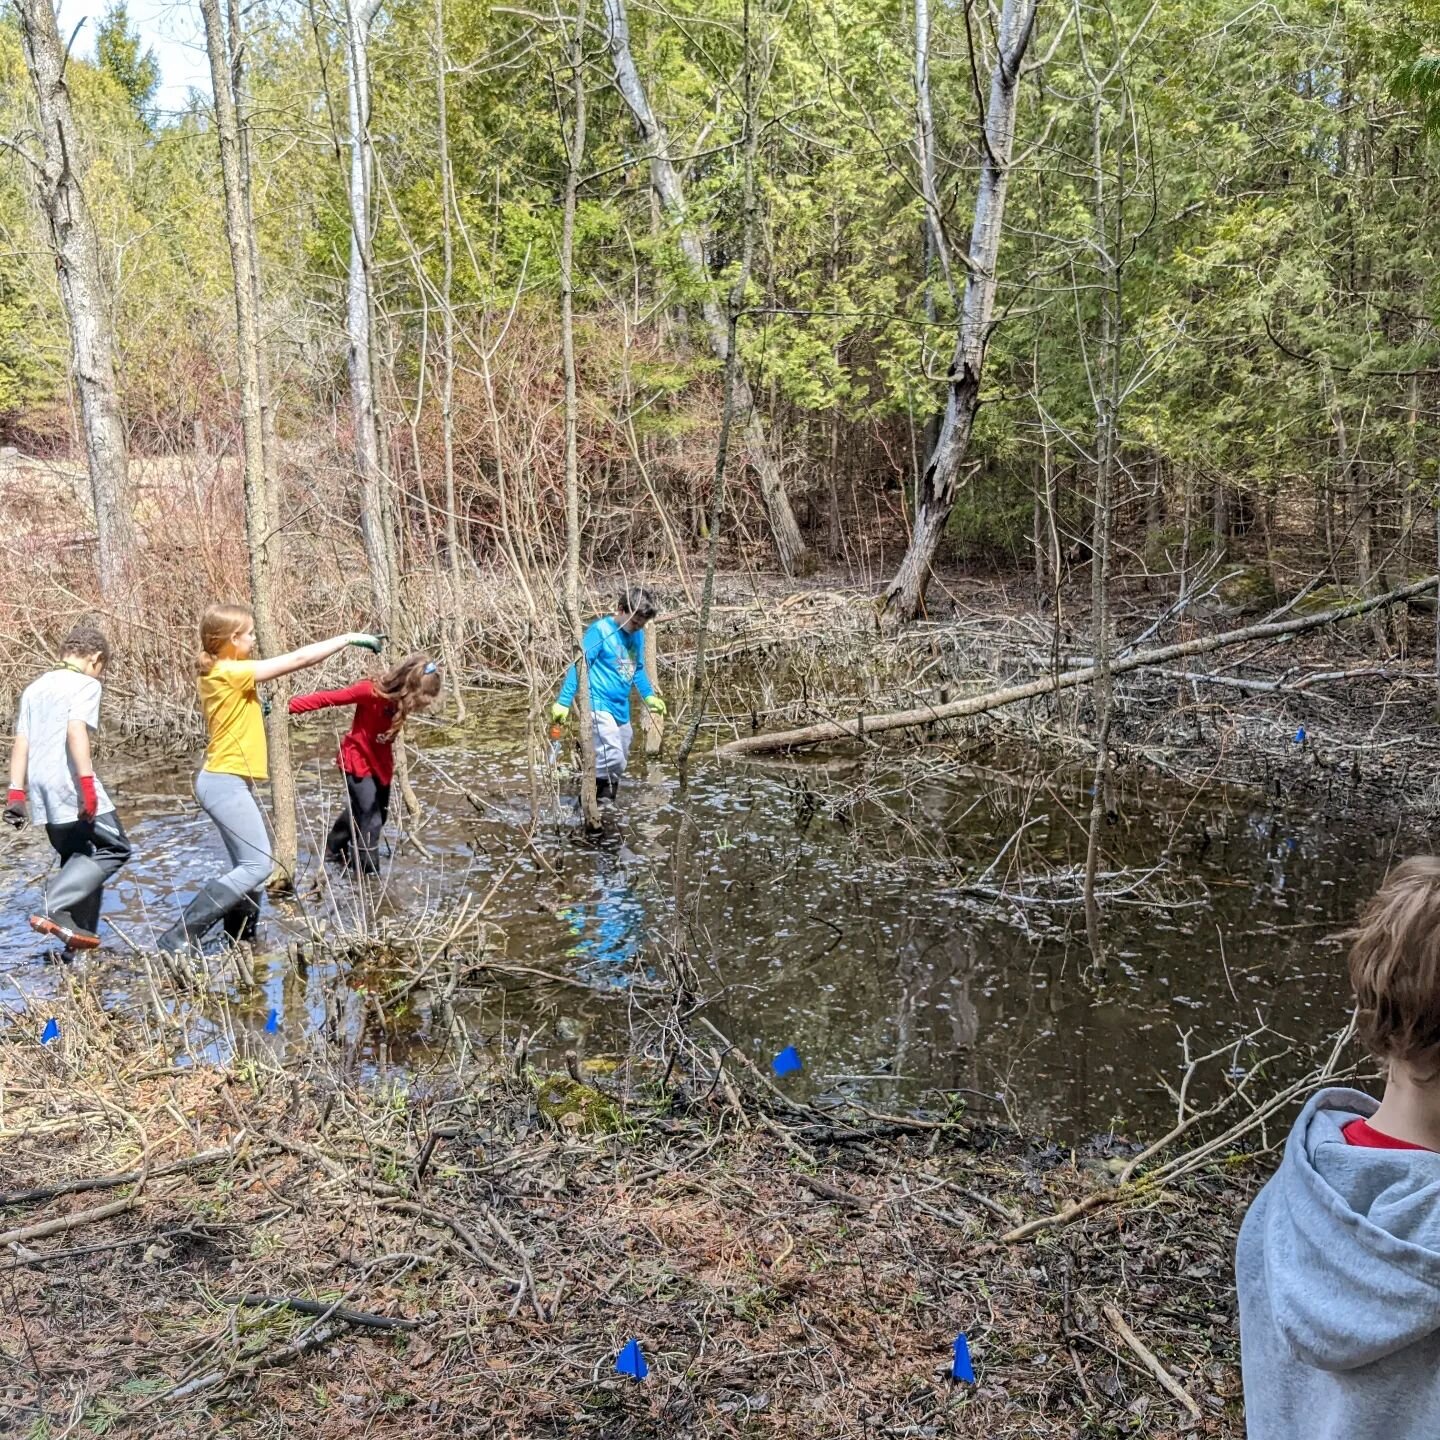 Sunrise School's 4th graders loved exploring the creek today after they planted many woodland ferns throughout the day. See the ferns take root (marked by blue flags) during your next visit to @crossroadsatbigcreek